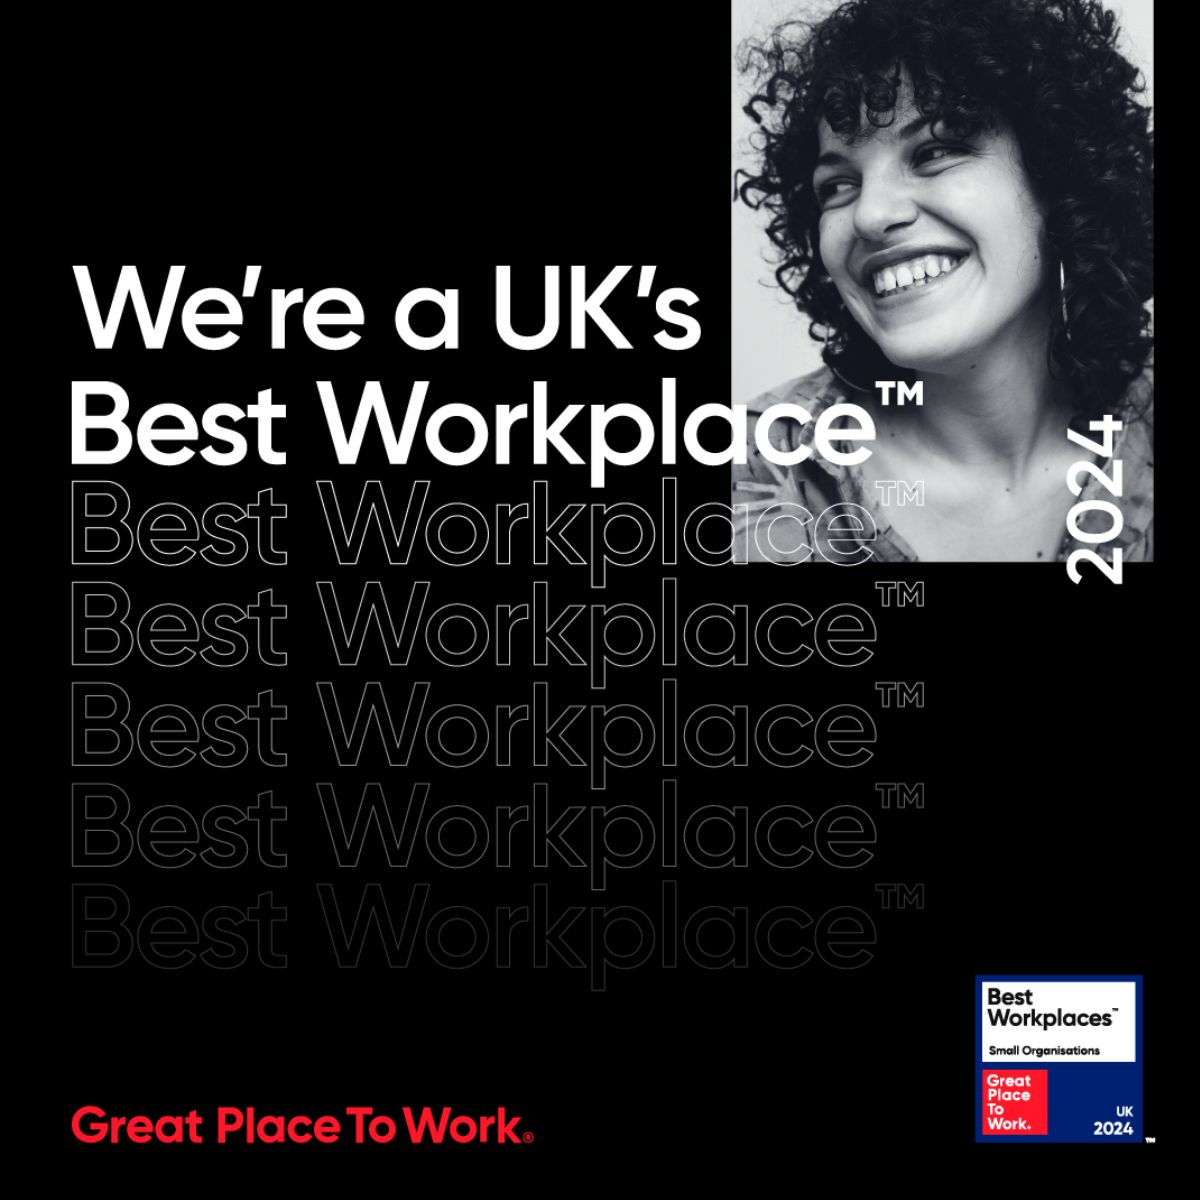 We're super proud to announce that Fuel Bank Foundation has been named one of the UK's Best Workplaces by Best Place to Work. 🙌 We ranked 53rd in the small organisations (10-50 employees) category and the only charity to have made it in the list. #UKBestWorkplaces